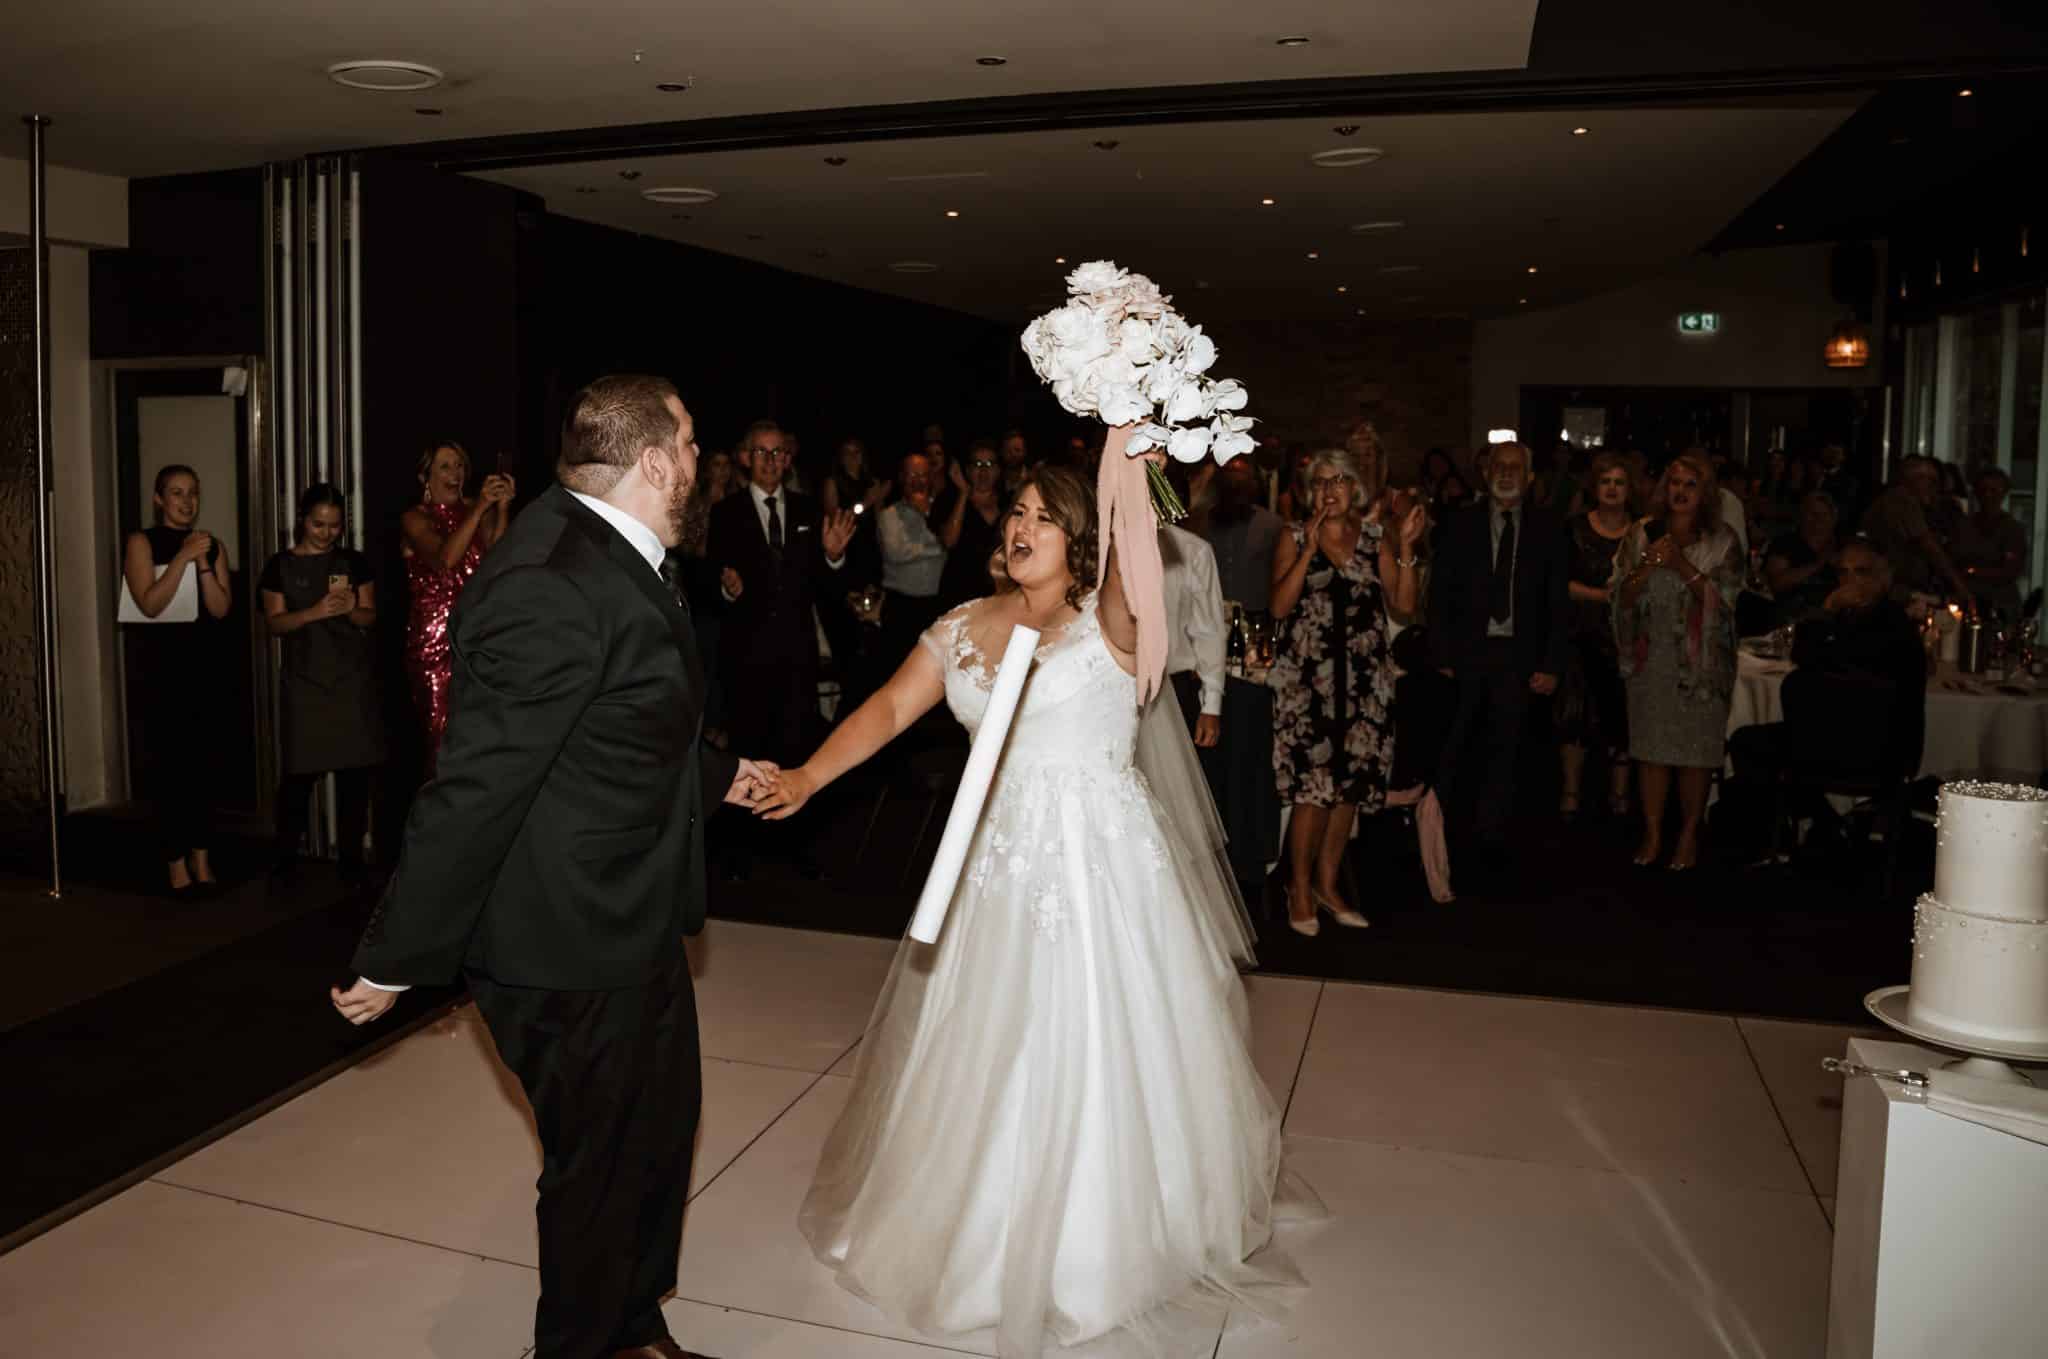 A modern wedding for bride Mandy and groom Drew which is just like a fun party